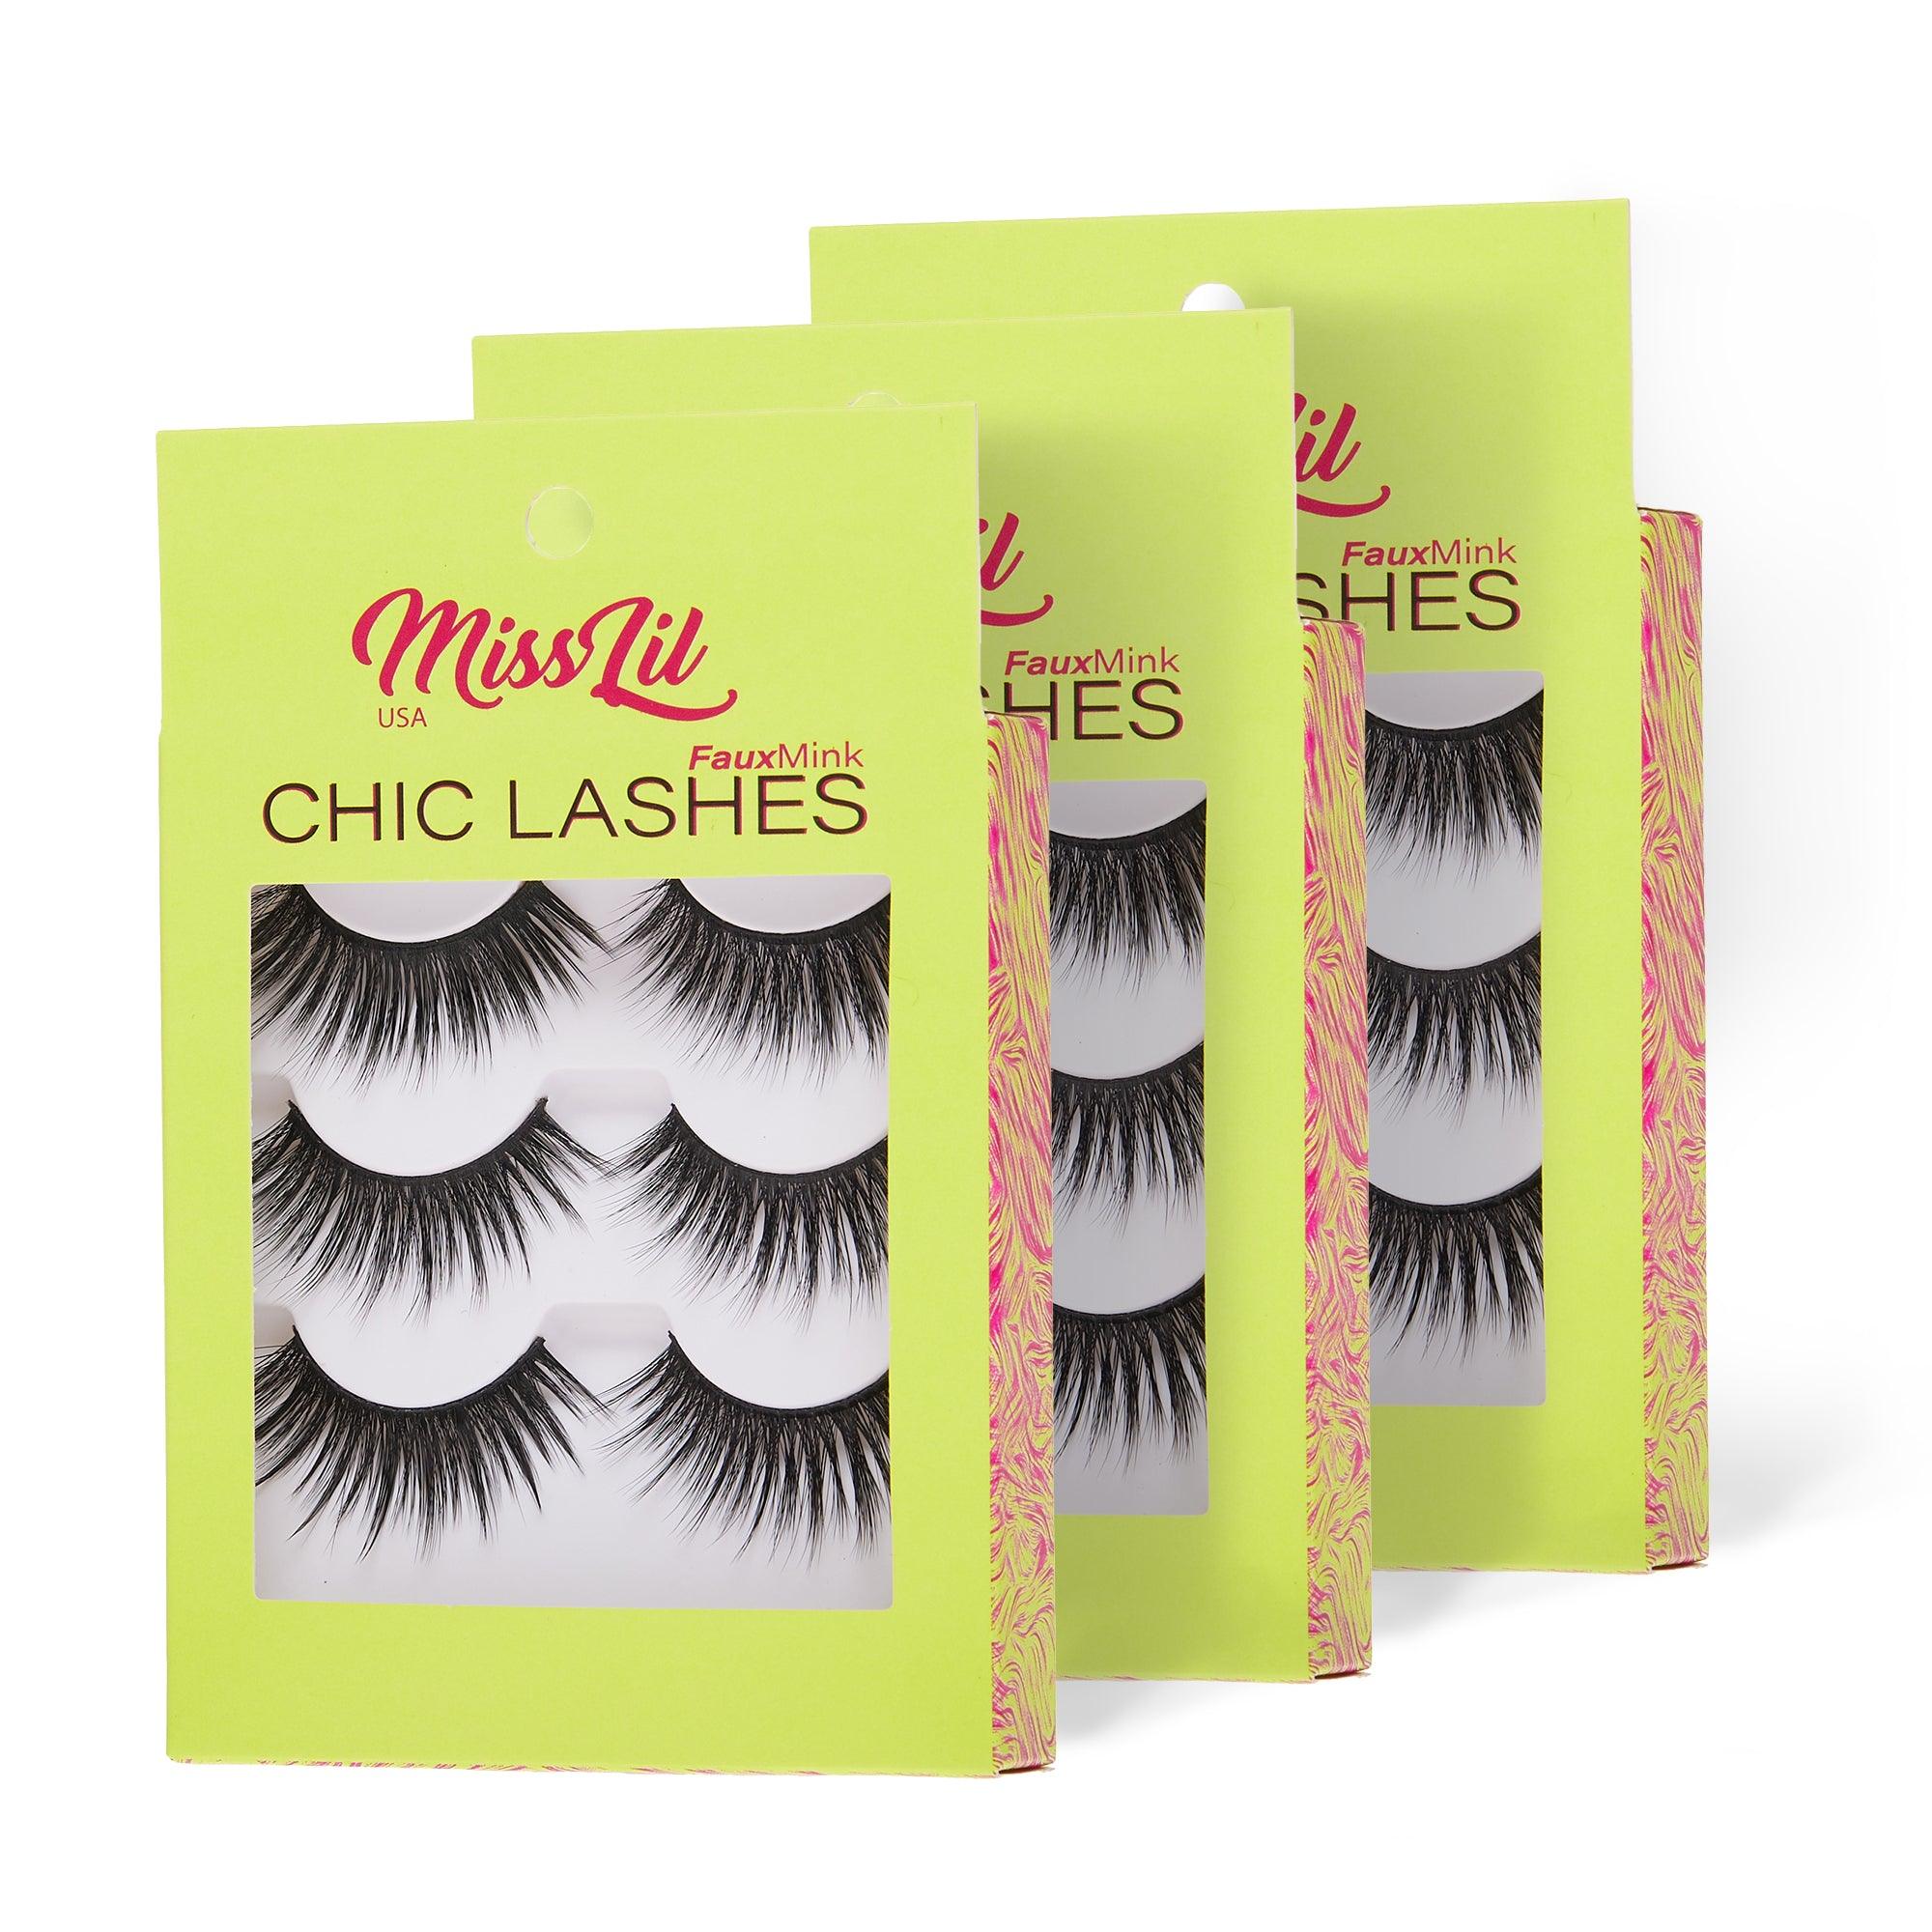 3-Pair Faux Mink Eyelashes - Chic Lashes Collection #17 - Pack of 3 - Miss Lil USA